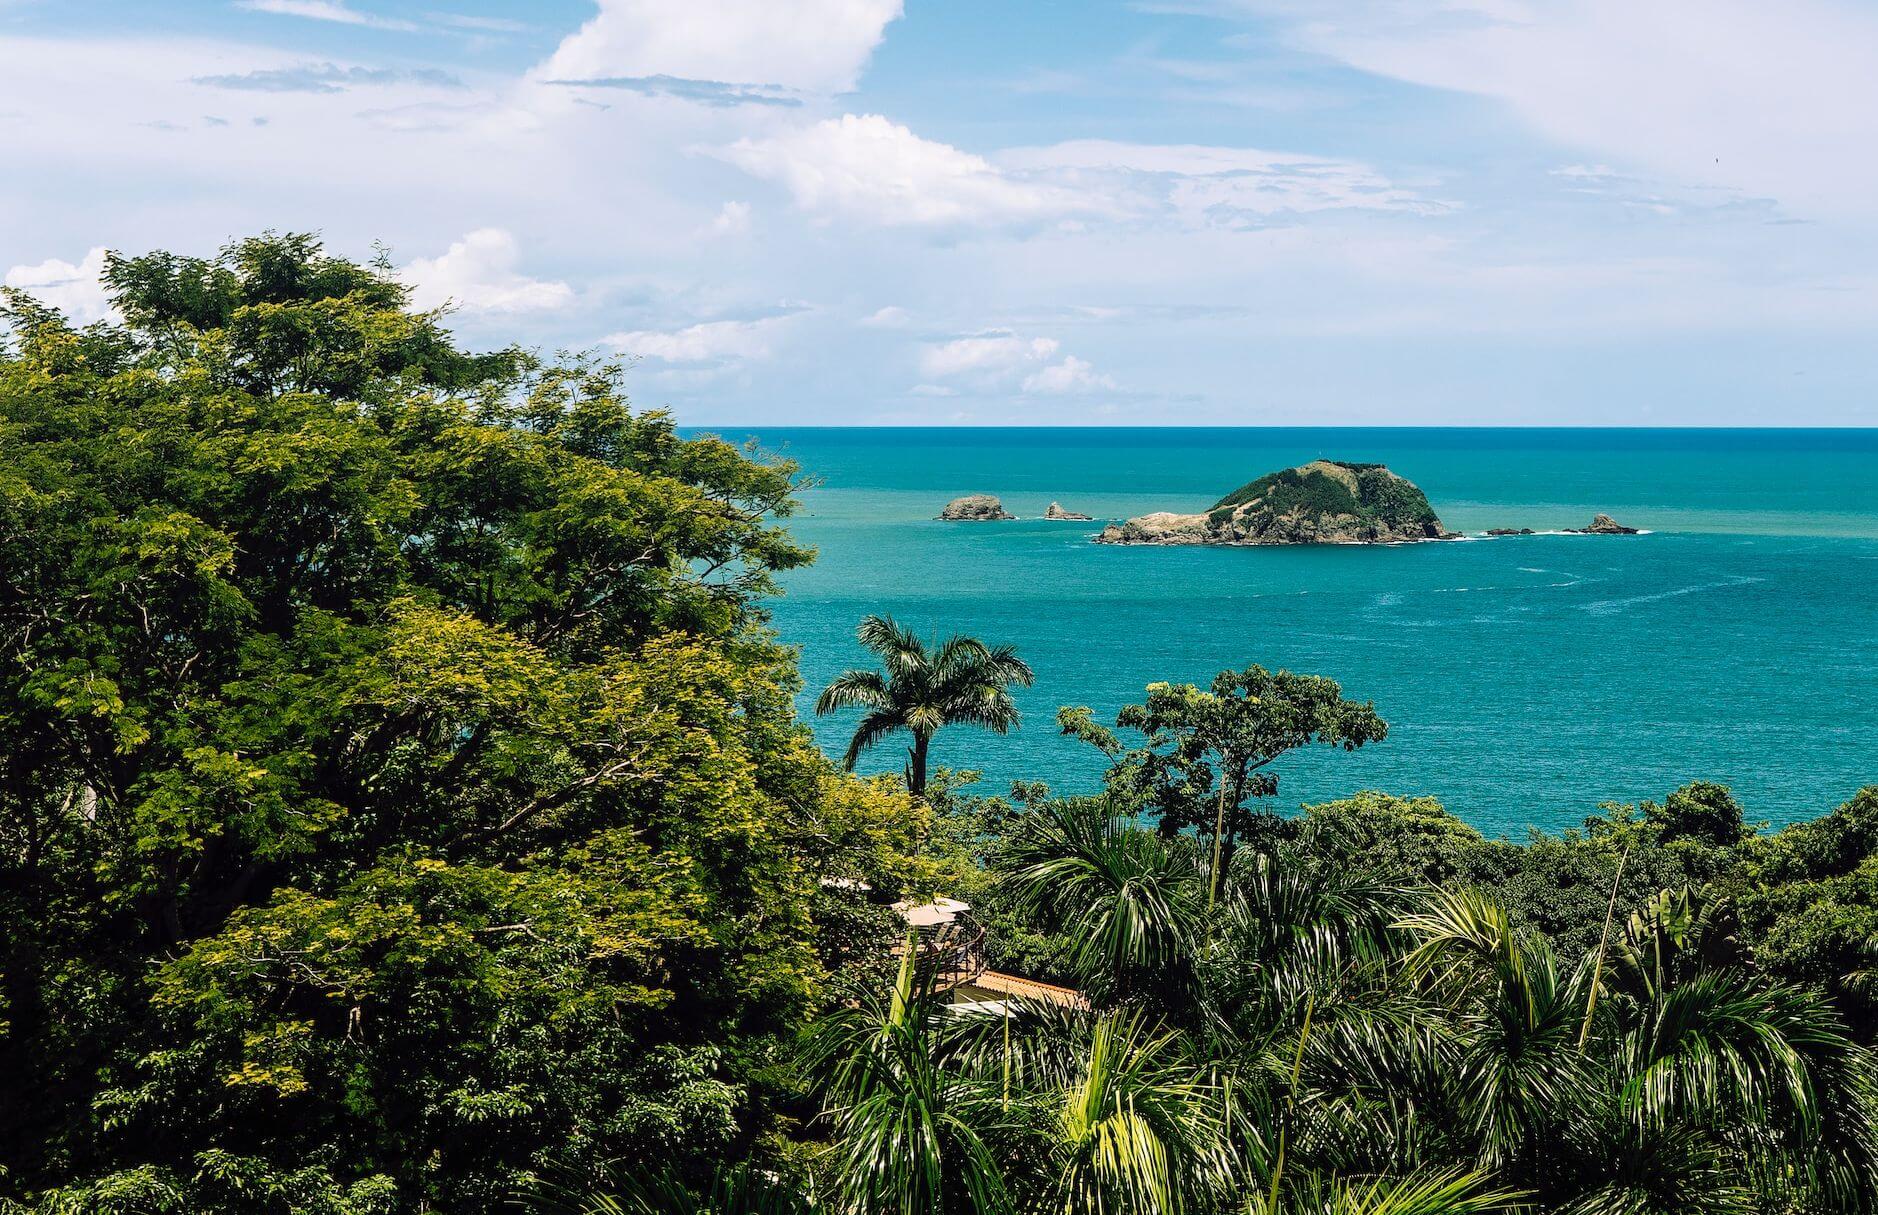 A view of the sea across the palm grove in Manuel Antonio, Costa Rica